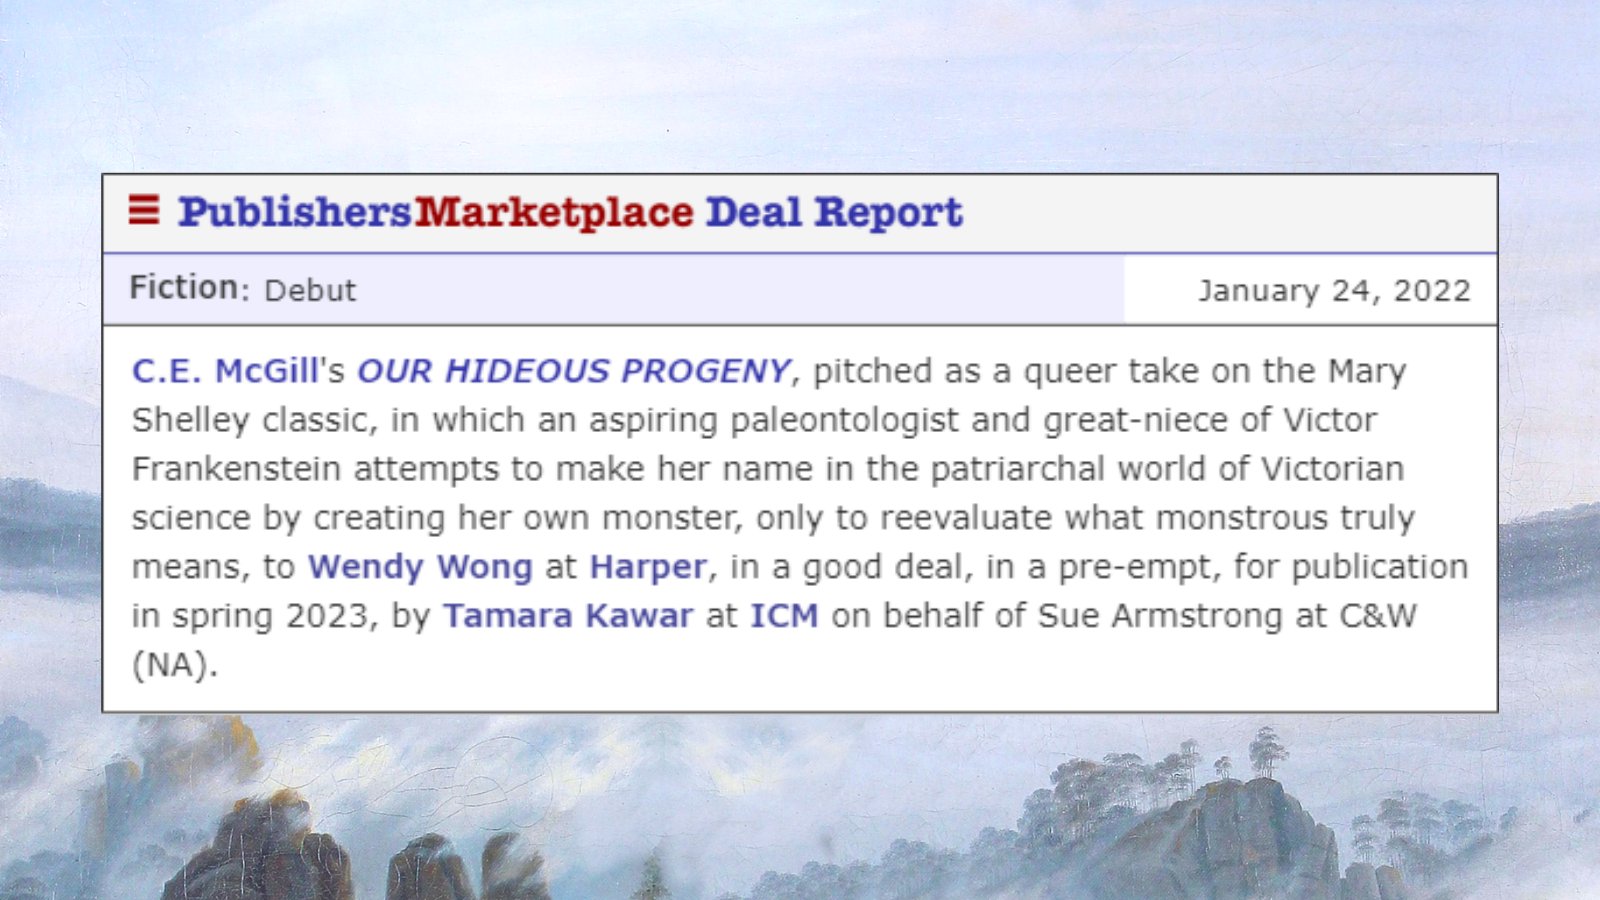 Publisher's Marketplace Deal Report: Fiction: Debut. January 24, 2022. C. E. McGill's "Our Hideous Progeny," pitched as a queer take on the Mary Shelley classic, in which an aspiring paleontologist and great-neice of Victor Frankenstein attempts to make her name in the patriarchal world of Victorian science by creating her own monster, only to reevaluate what monstrous truly means, to Wendy Wong at Harper, in a good deal, in a pre-empt, for publication in spring 2023, by Tamara Kawar at ICM on behalf of Sue Armstrong at C&W (NA). 